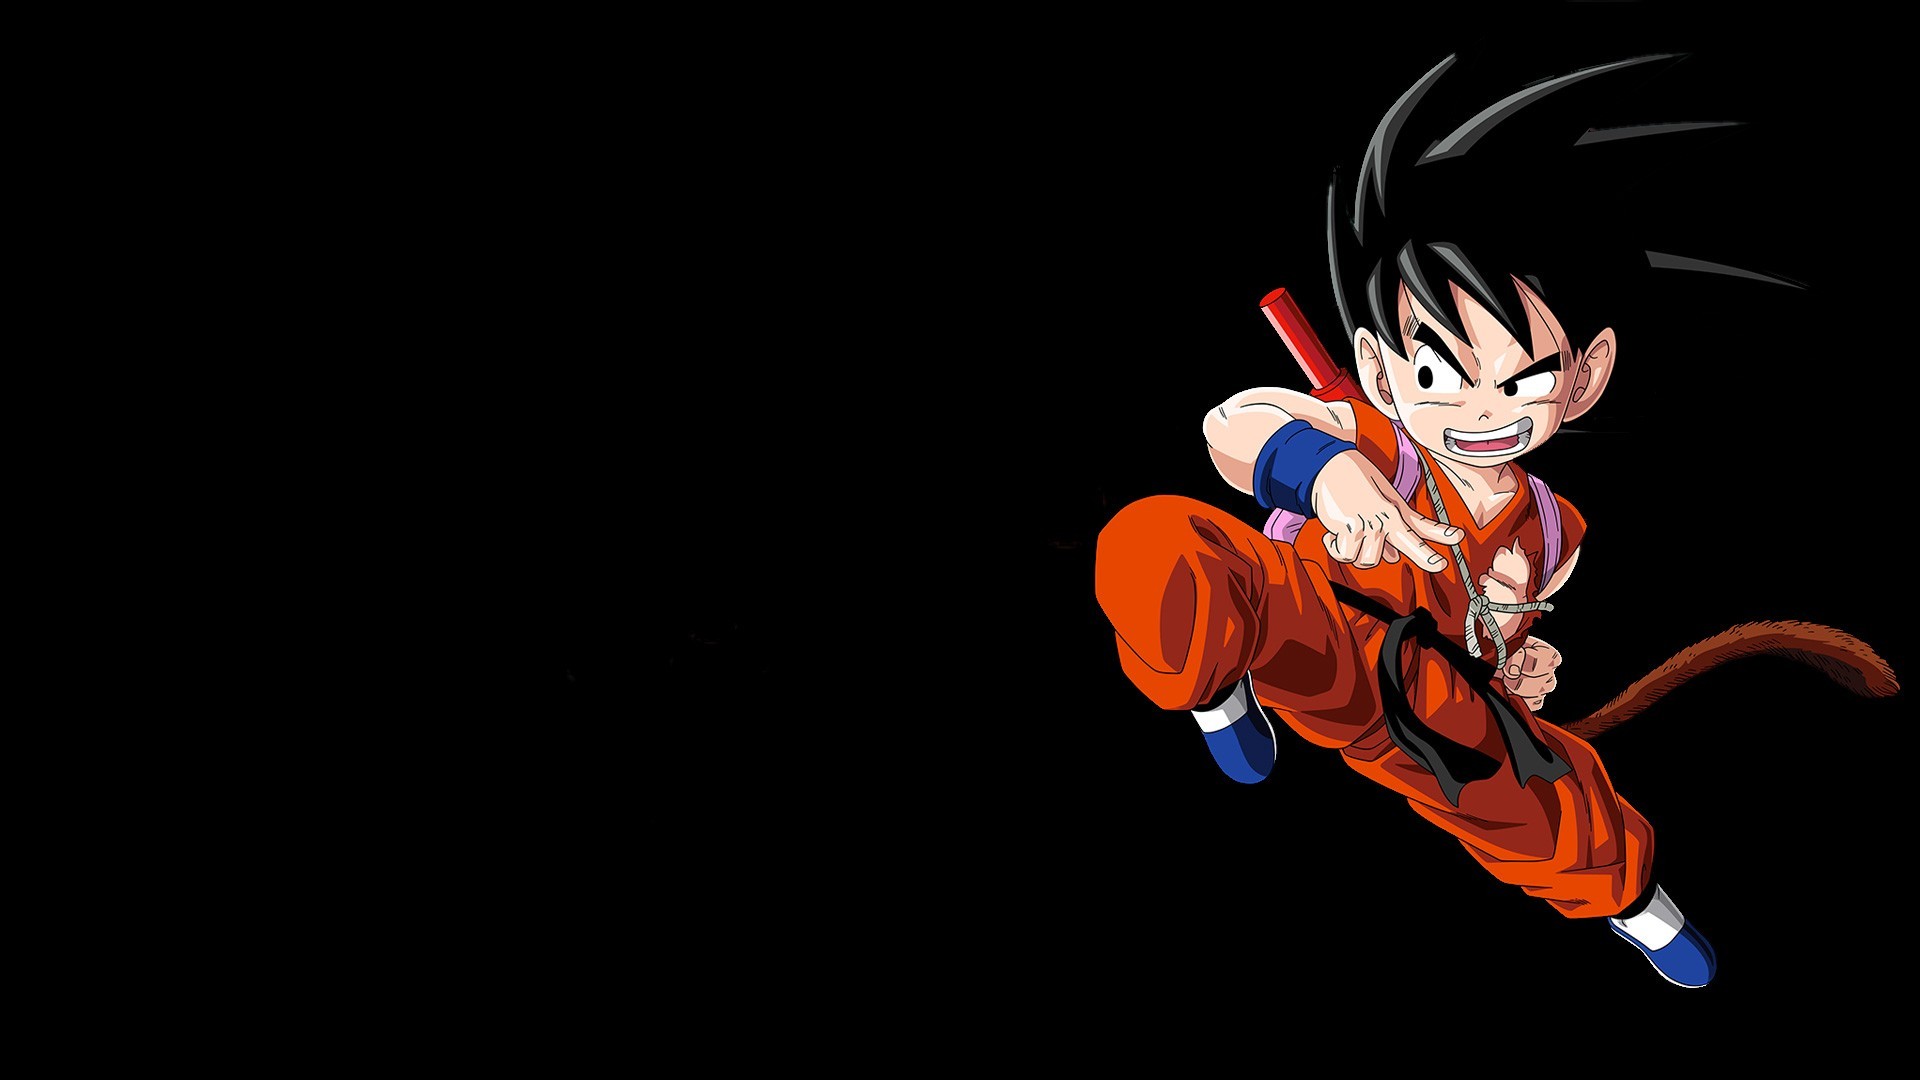 HD Kid Goku Backgrounds with image resolution 1920x1080 pixel. You can use this wallpaper as background for your desktop Computer Screensavers, Android or iPhone smartphones